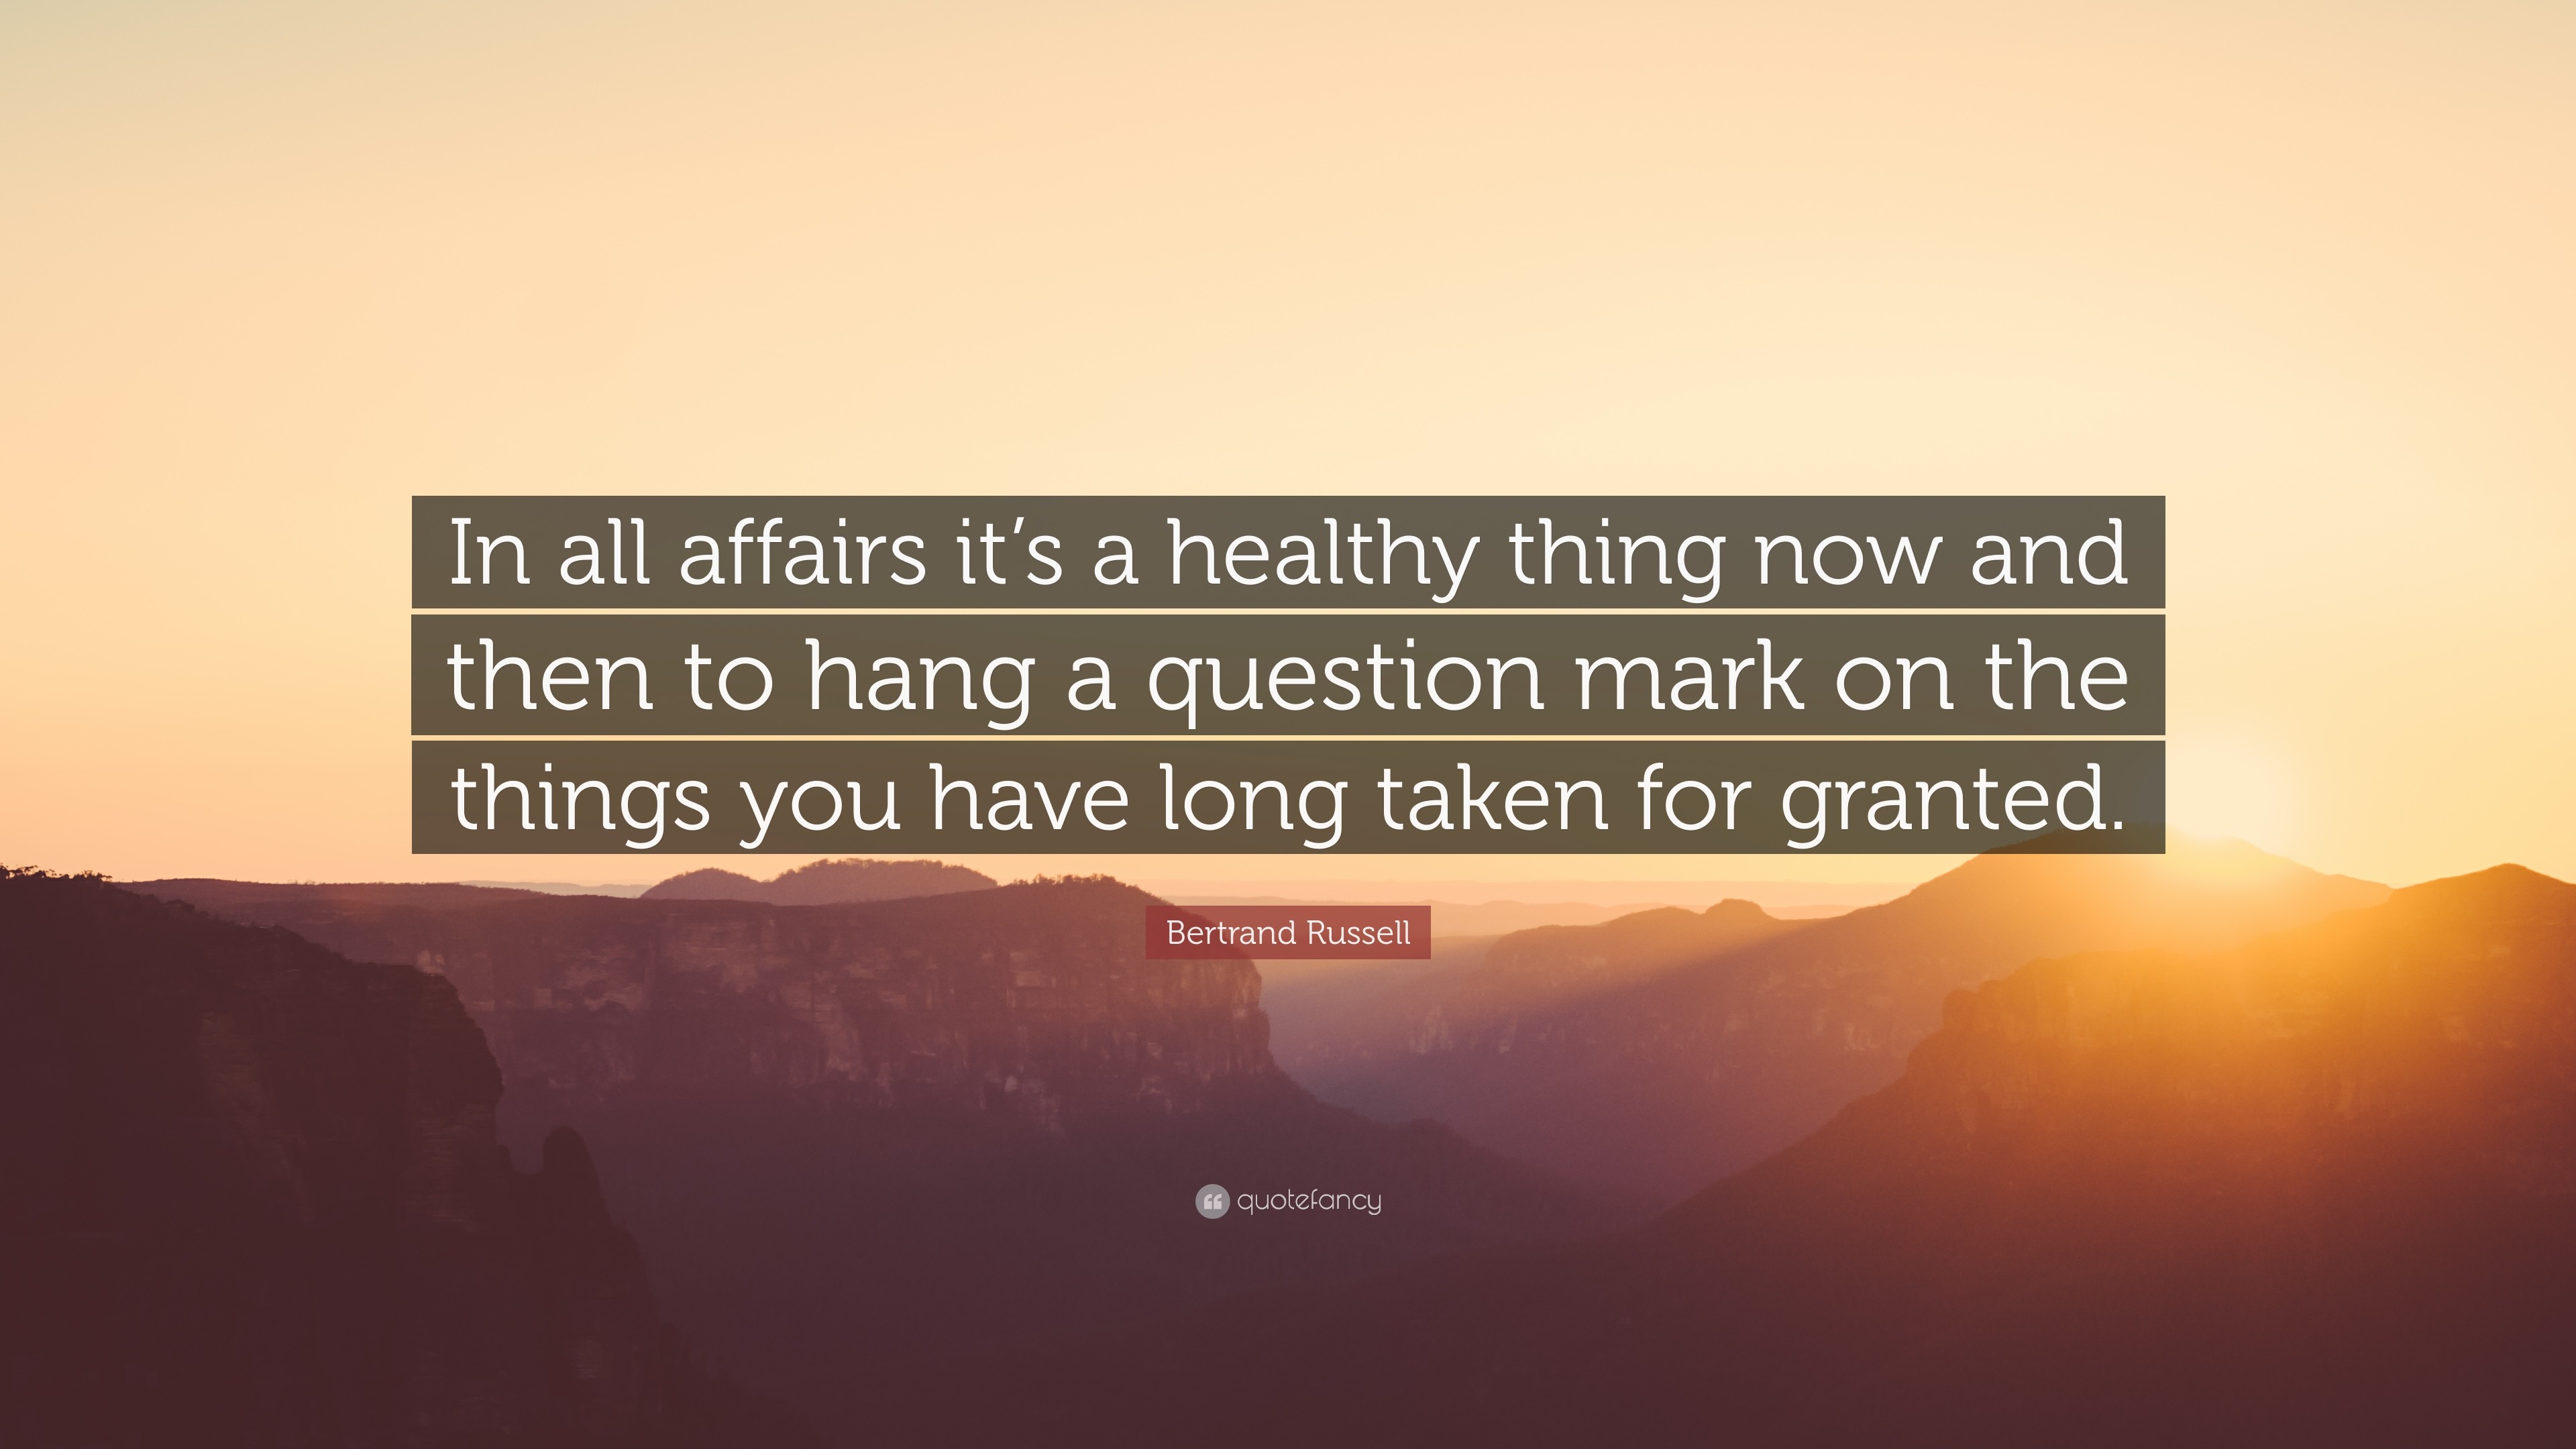 3840x2160 Bertrand Russell Quote: “In all affairs it's a healthy thing now and then to